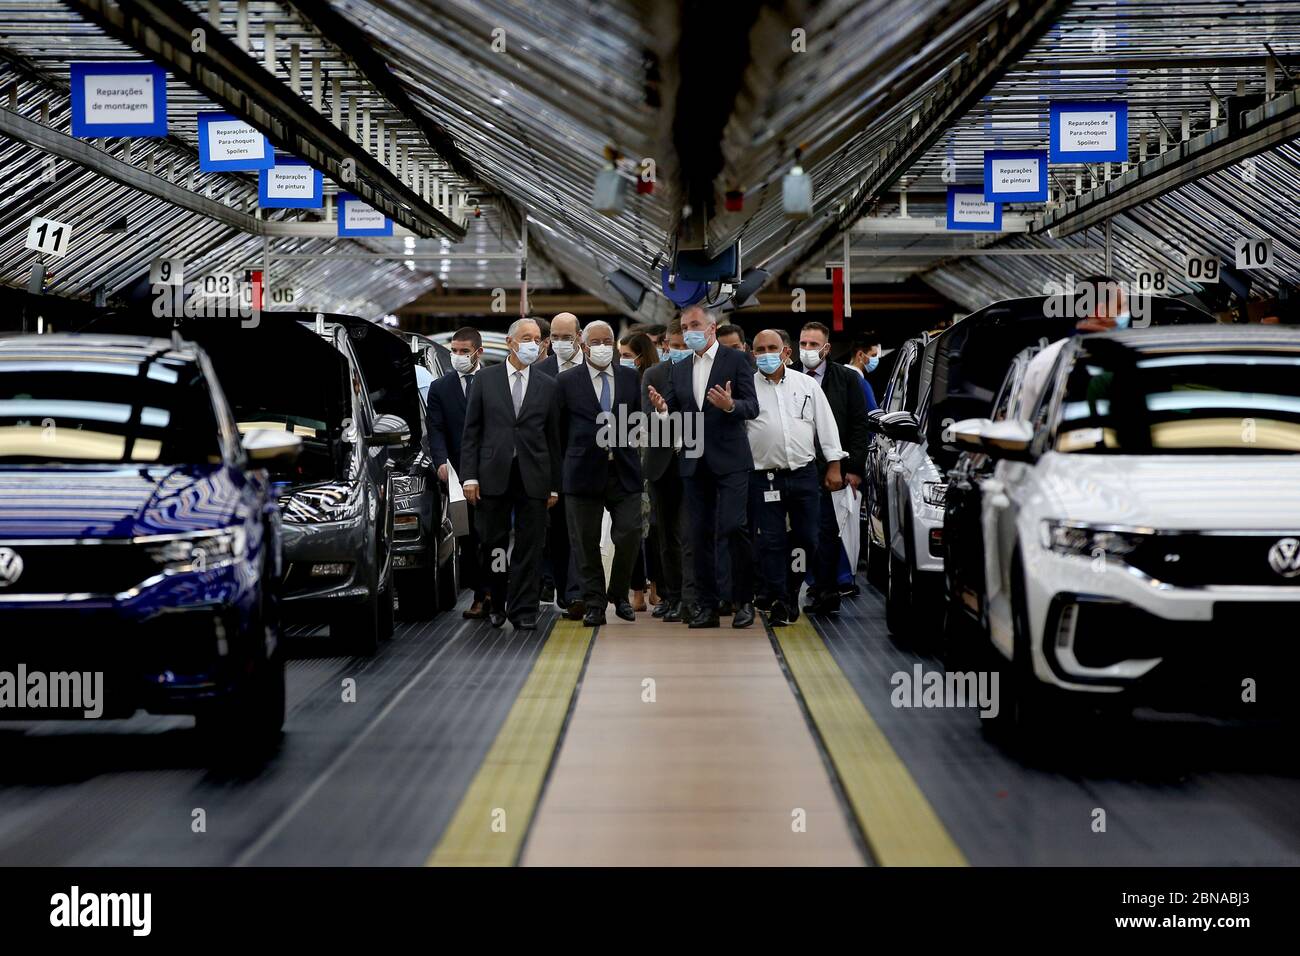 (200514) -- LISBON, May 14, 2020 (Xinhua) -- Portuguese President Marcelo Rebelo de Sousa (1st L, front) and Portuguese Prime Minister Antonio Costa (2nd L, front) visit the Volkswagen Autoeuropa car factory in Palmela, Portugal, May 13, 2020. Portuguese President Marcelo Rebelo de Sousa and Prime Minister Antonio Costa on Wednesday encouraged all industries to restart under strict conditions amid the COVID-19 pandemic, Lusa News Agency reported. After their joint visit to automotive assembly plant Autoeuropa, the two leaders expressed their confidence in the resumption of production for th Stock Photo